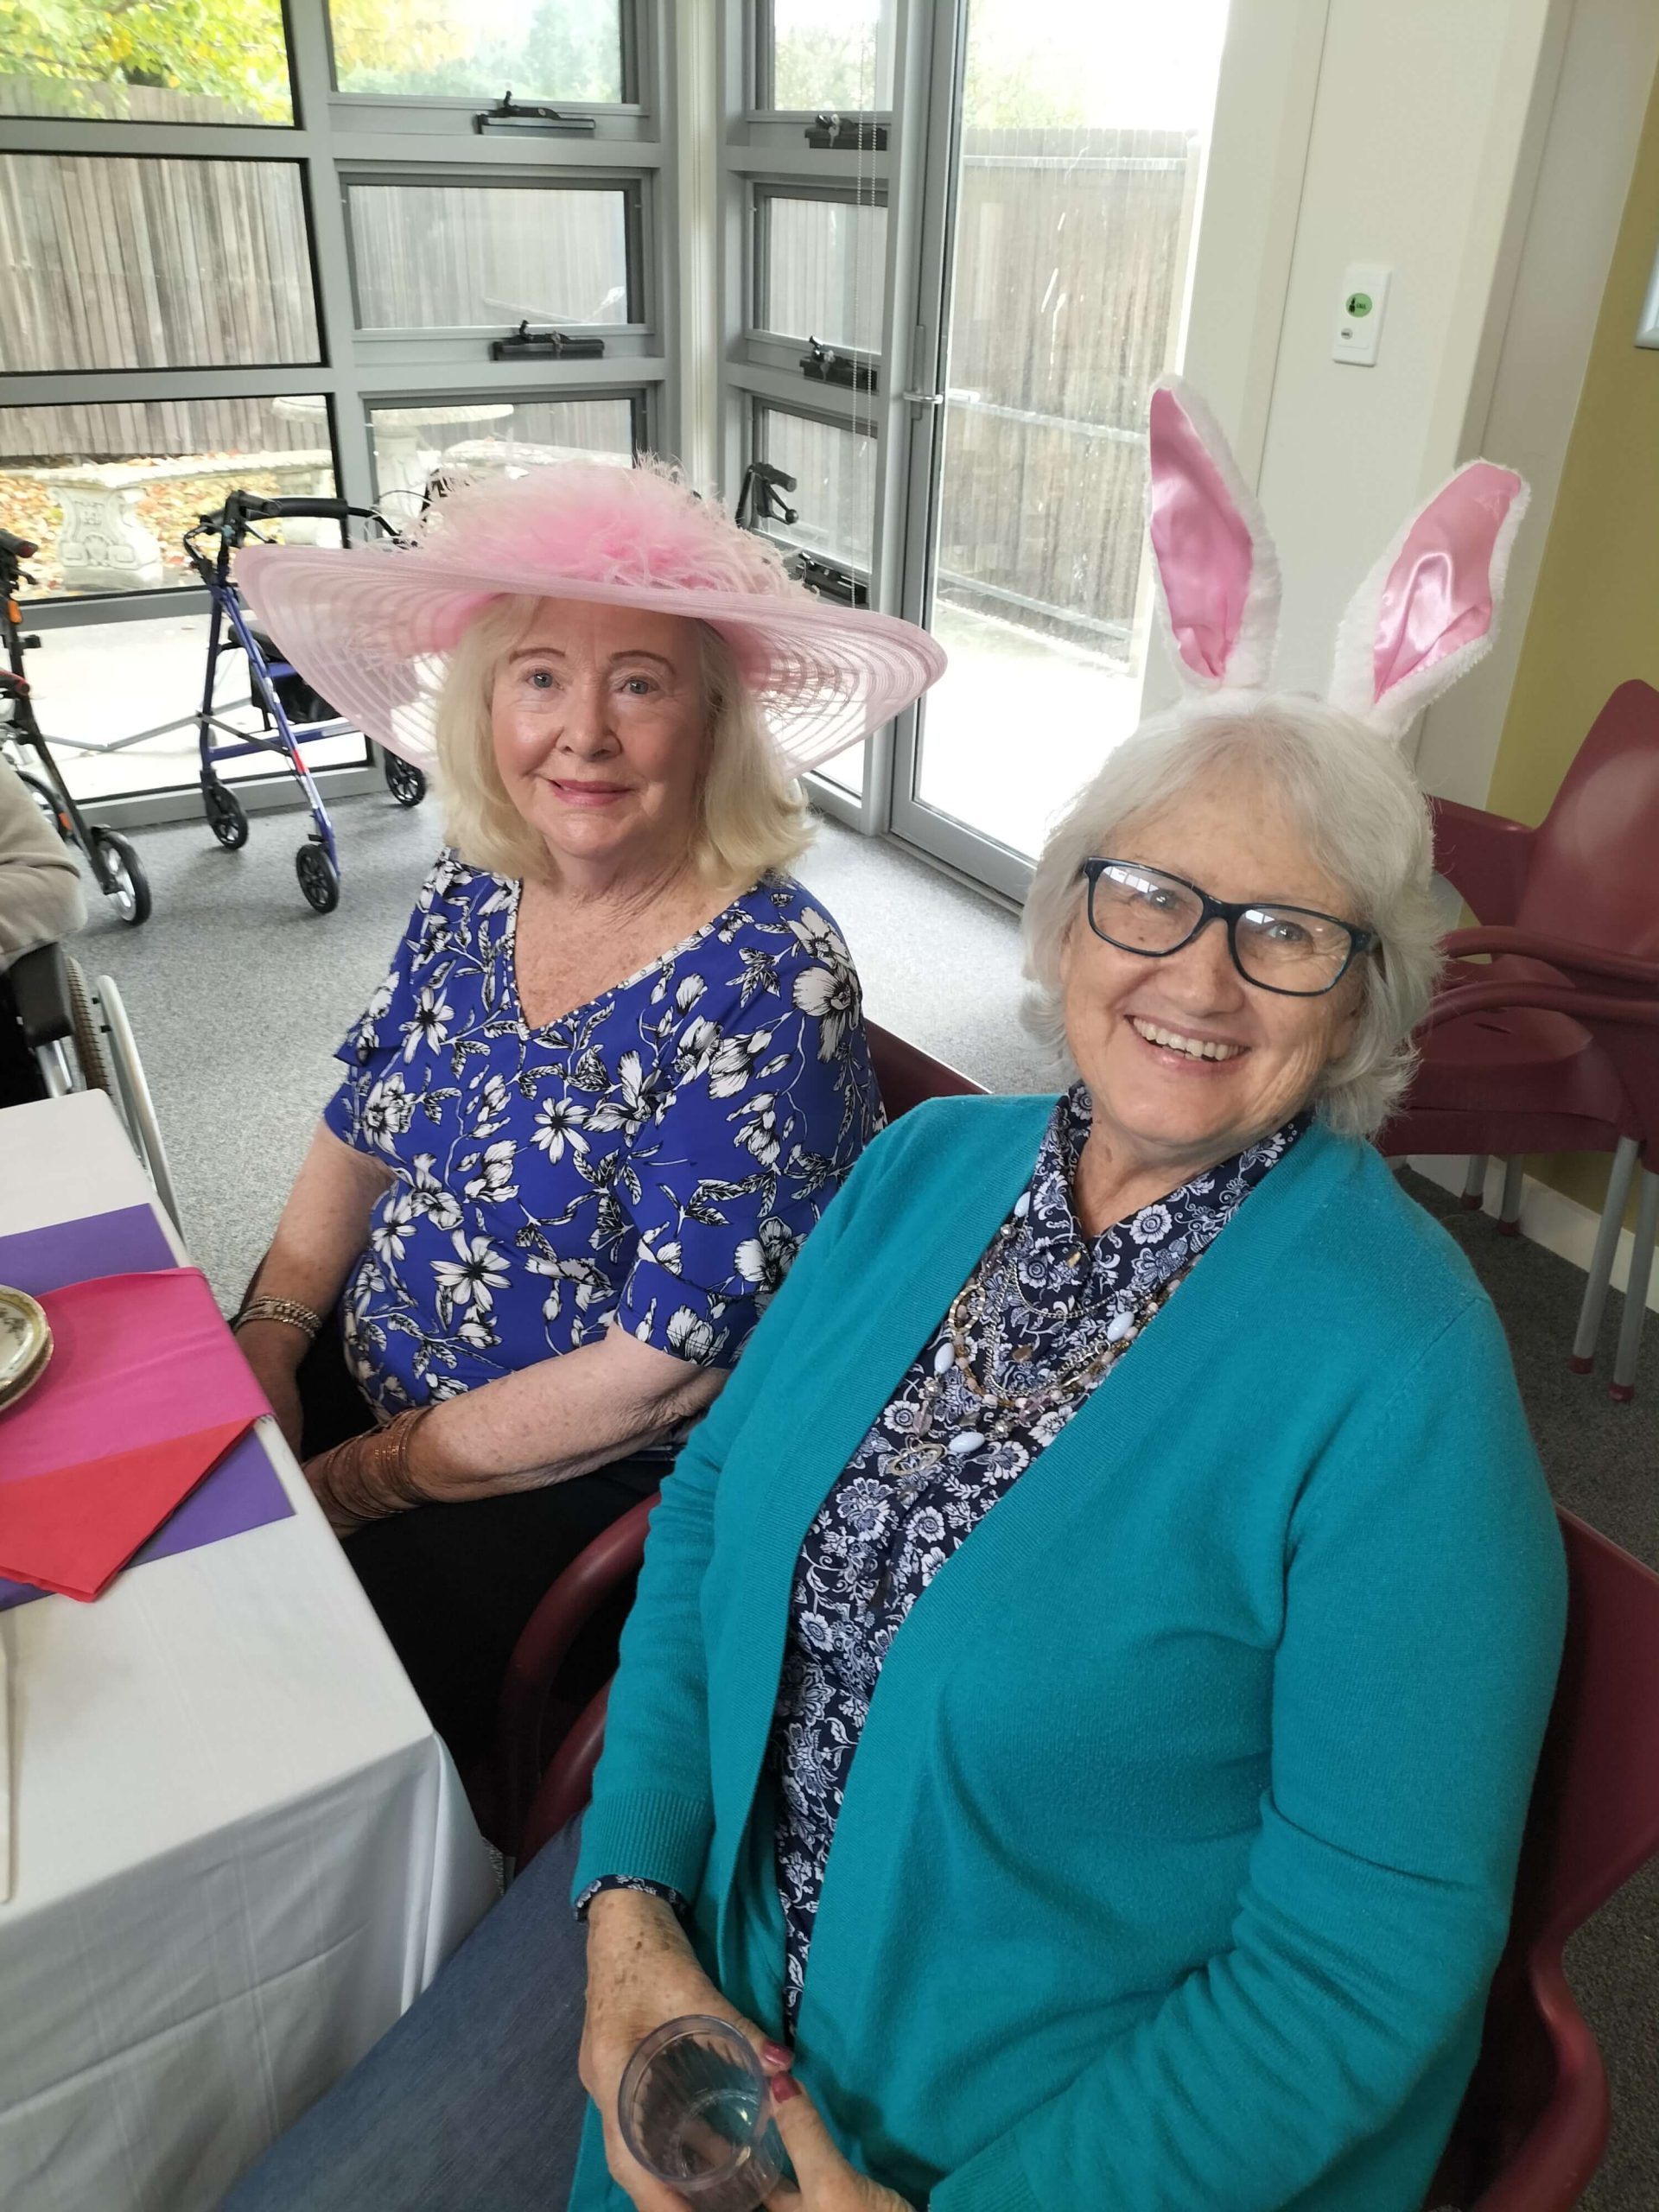 Photo of two elderly ladies sitting down wearing Easter Bonnet hats, one hat is pink with pink feathers on it, the other is pink rabbit ears. Both ladies look like they are having fun.